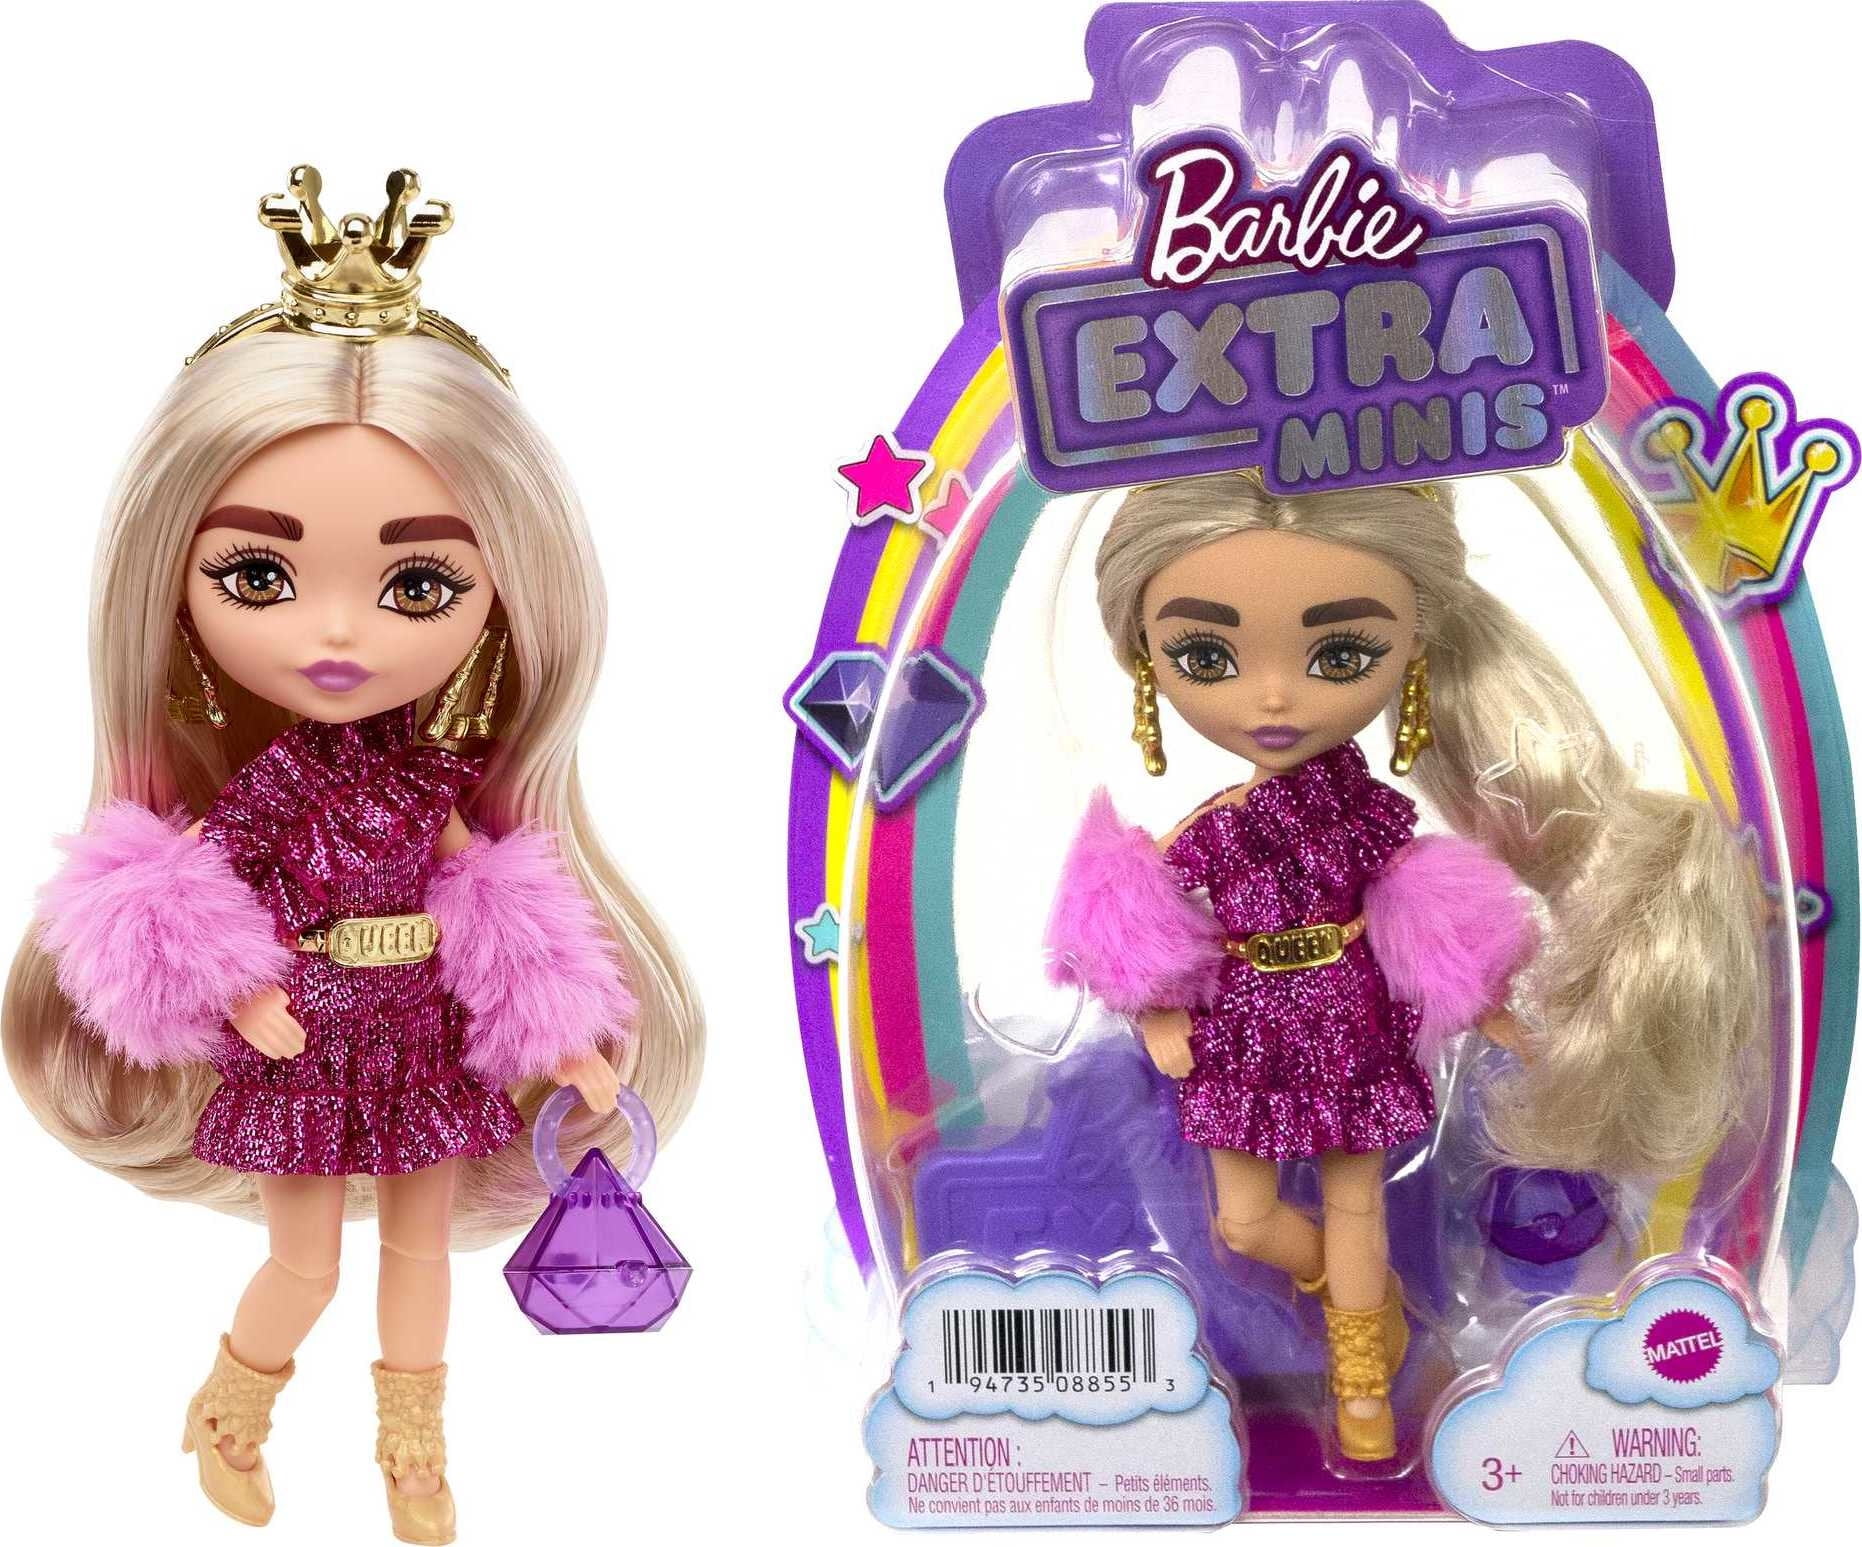 Barbie Extra Minis Doll with Blonde Hair in Shimmery Dress & Furry Shrug  with Accessories